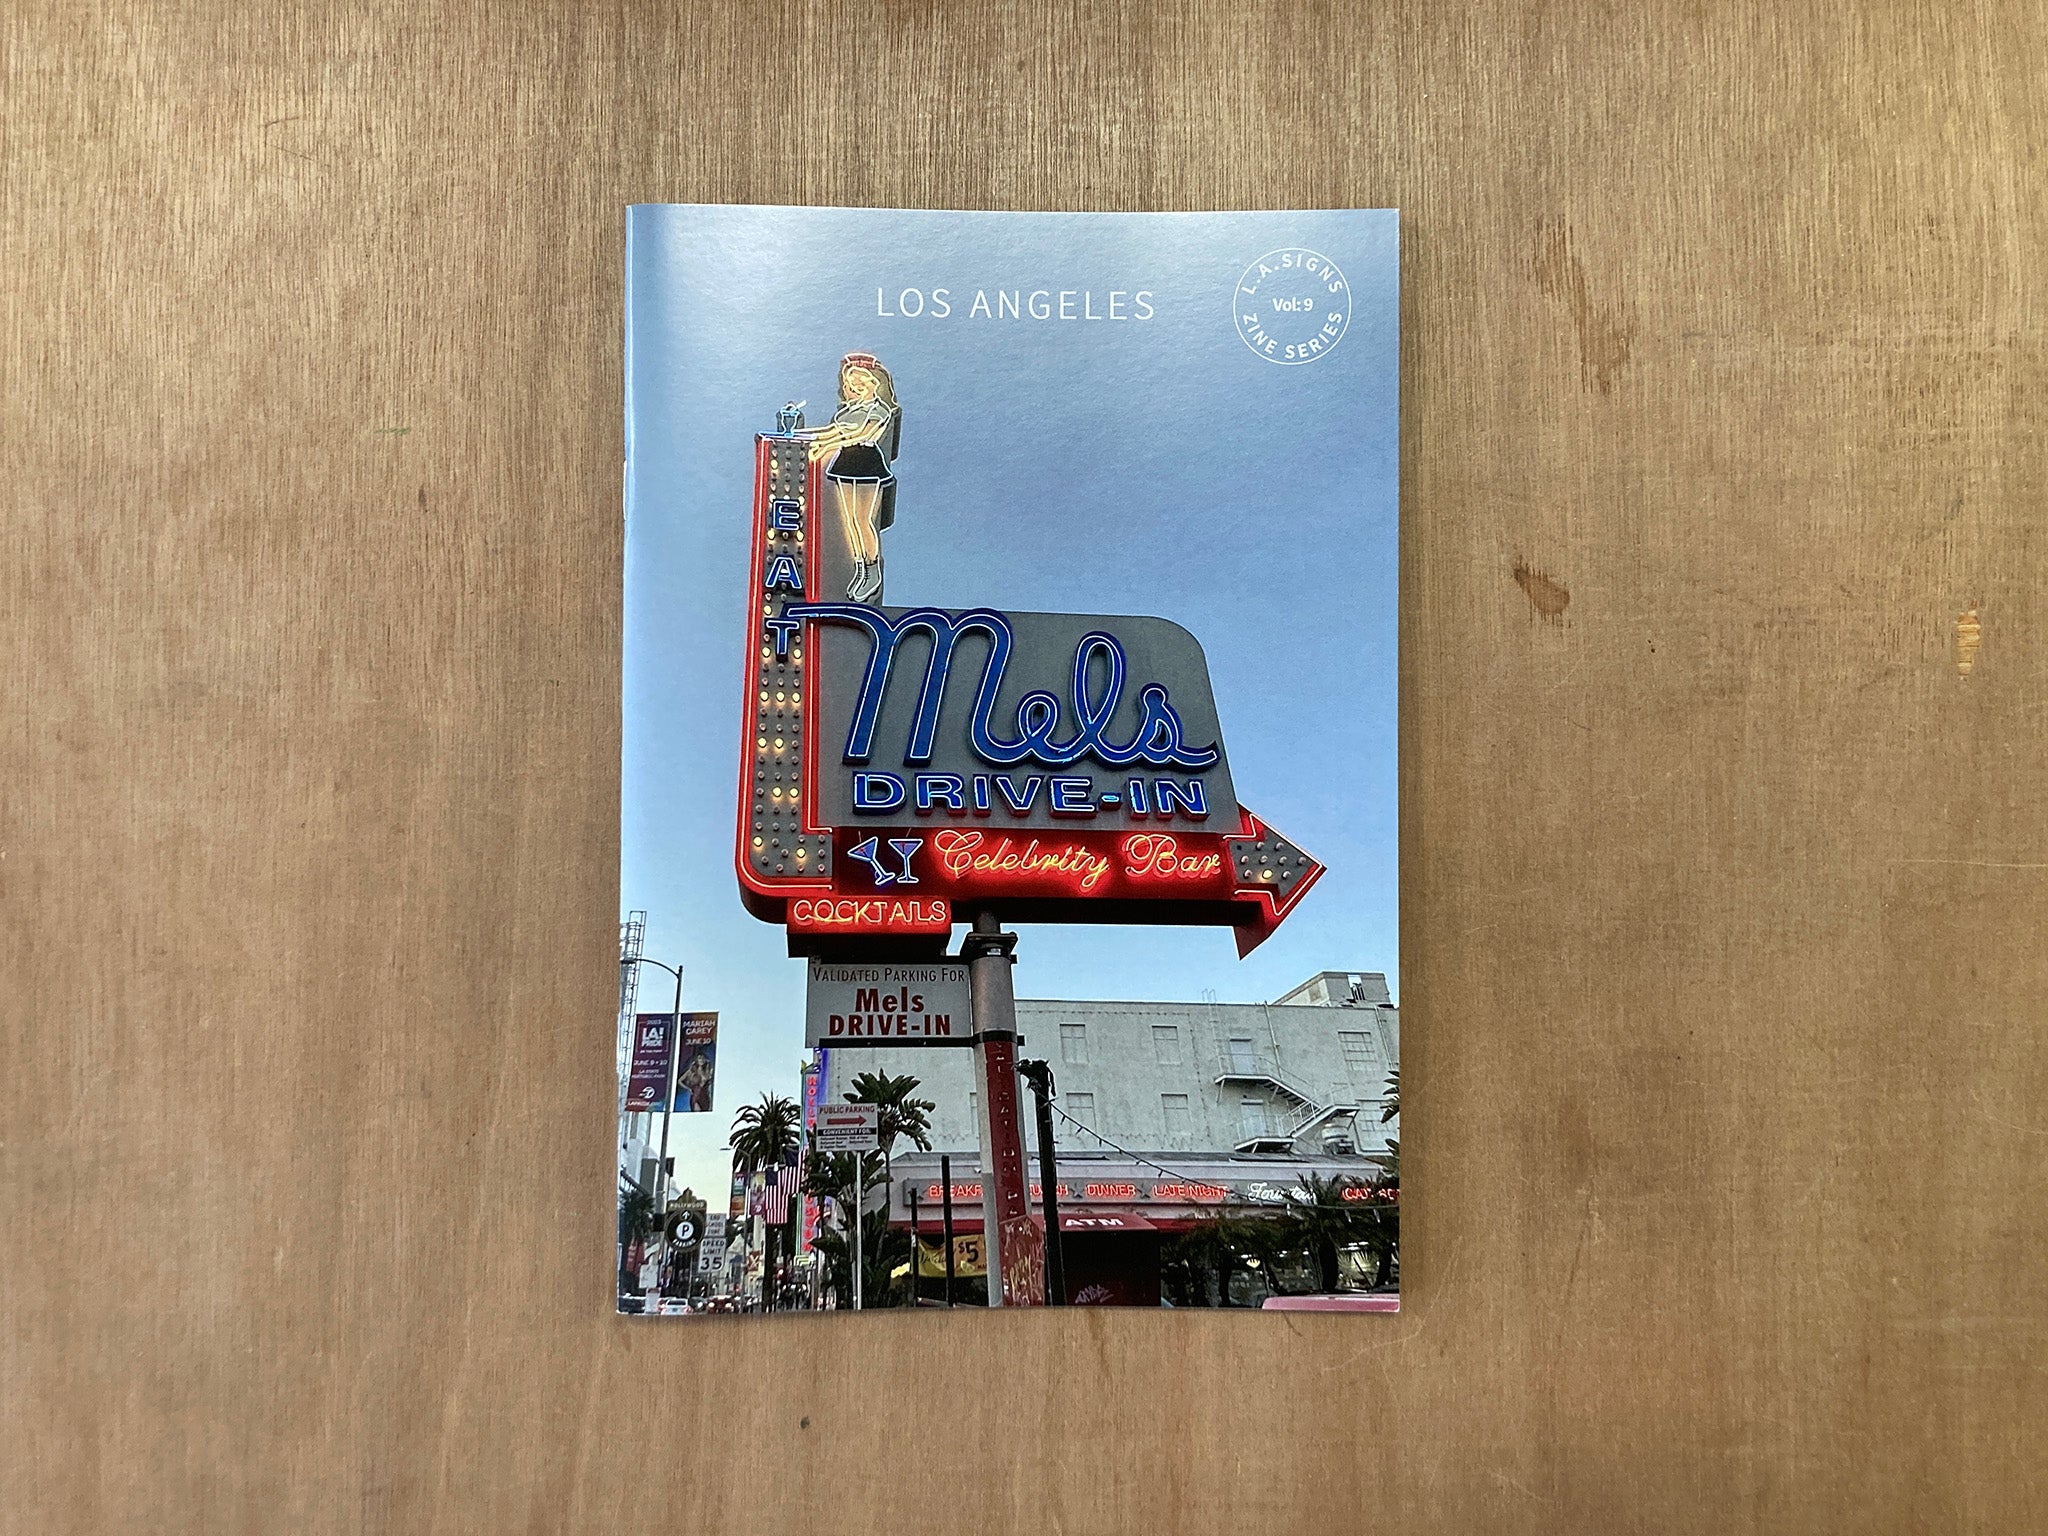 L.A. SIGNS ZINE SERIES: LOS ANGELES by Paul Price